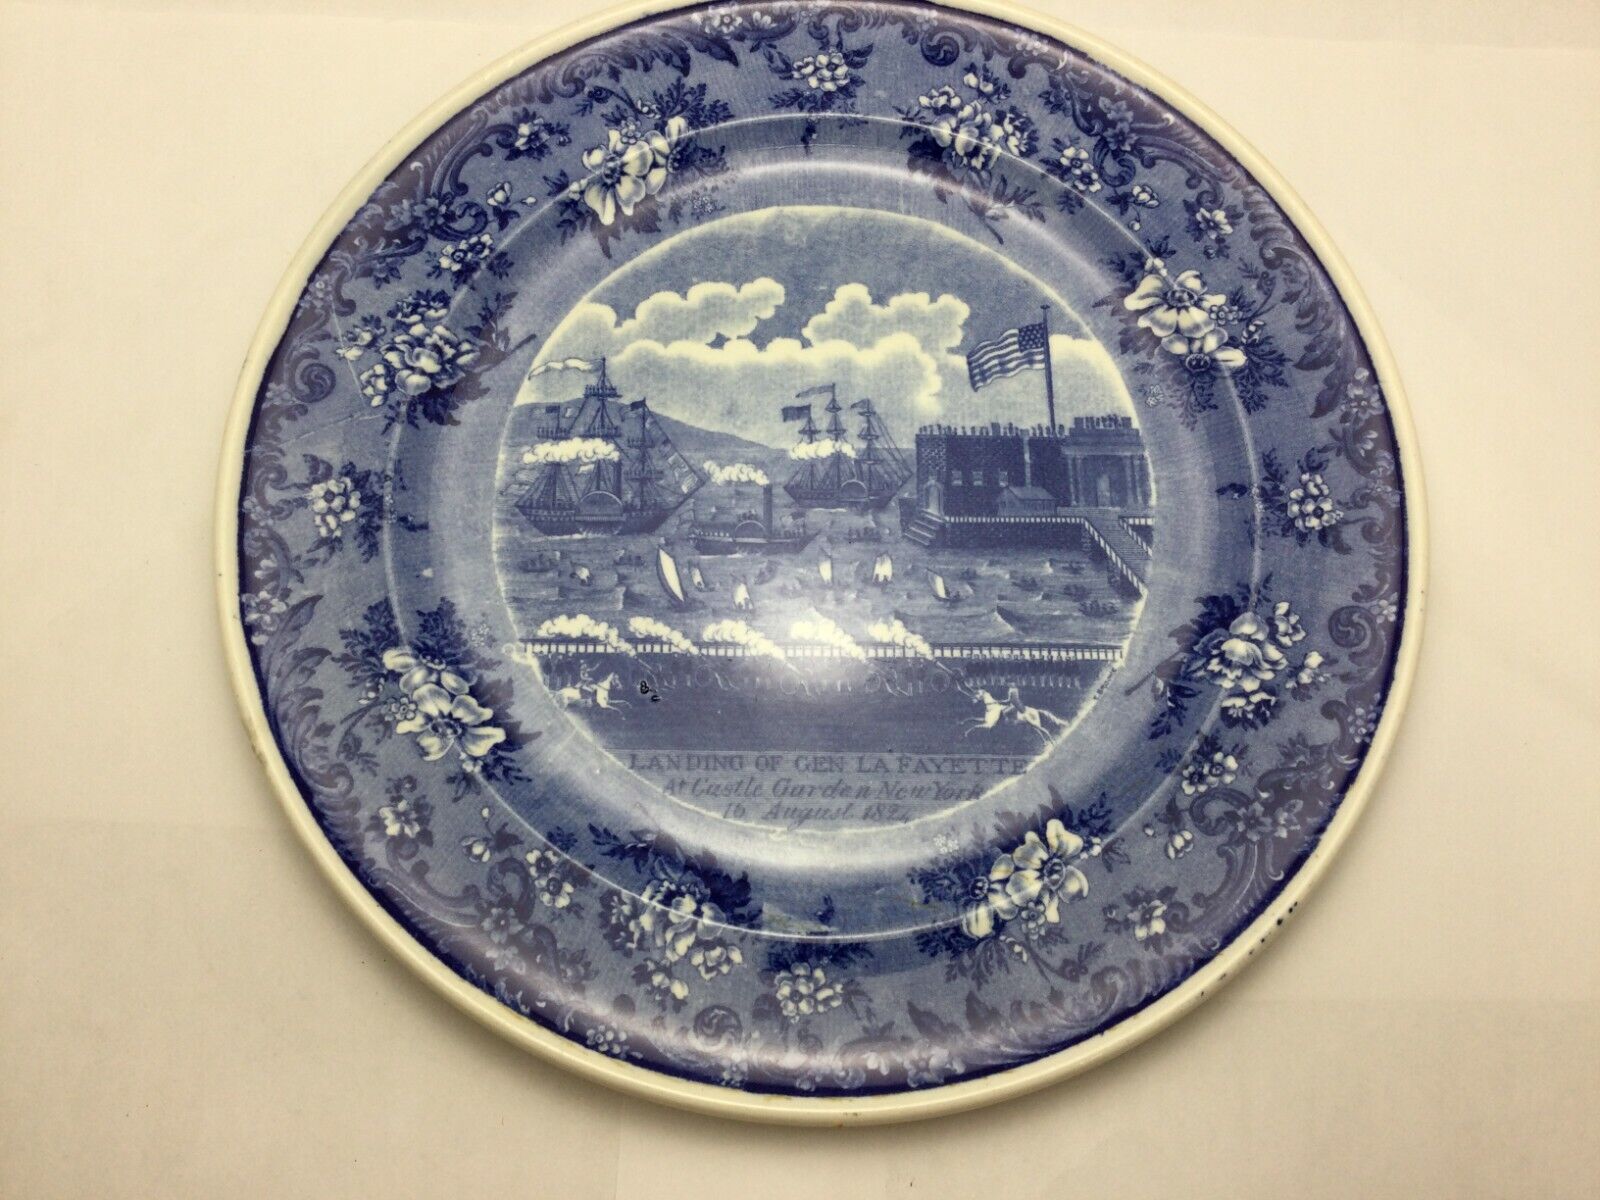 Antique Wright Tyndale & Van Roden Blue and White Decorative Plate - Landing of 